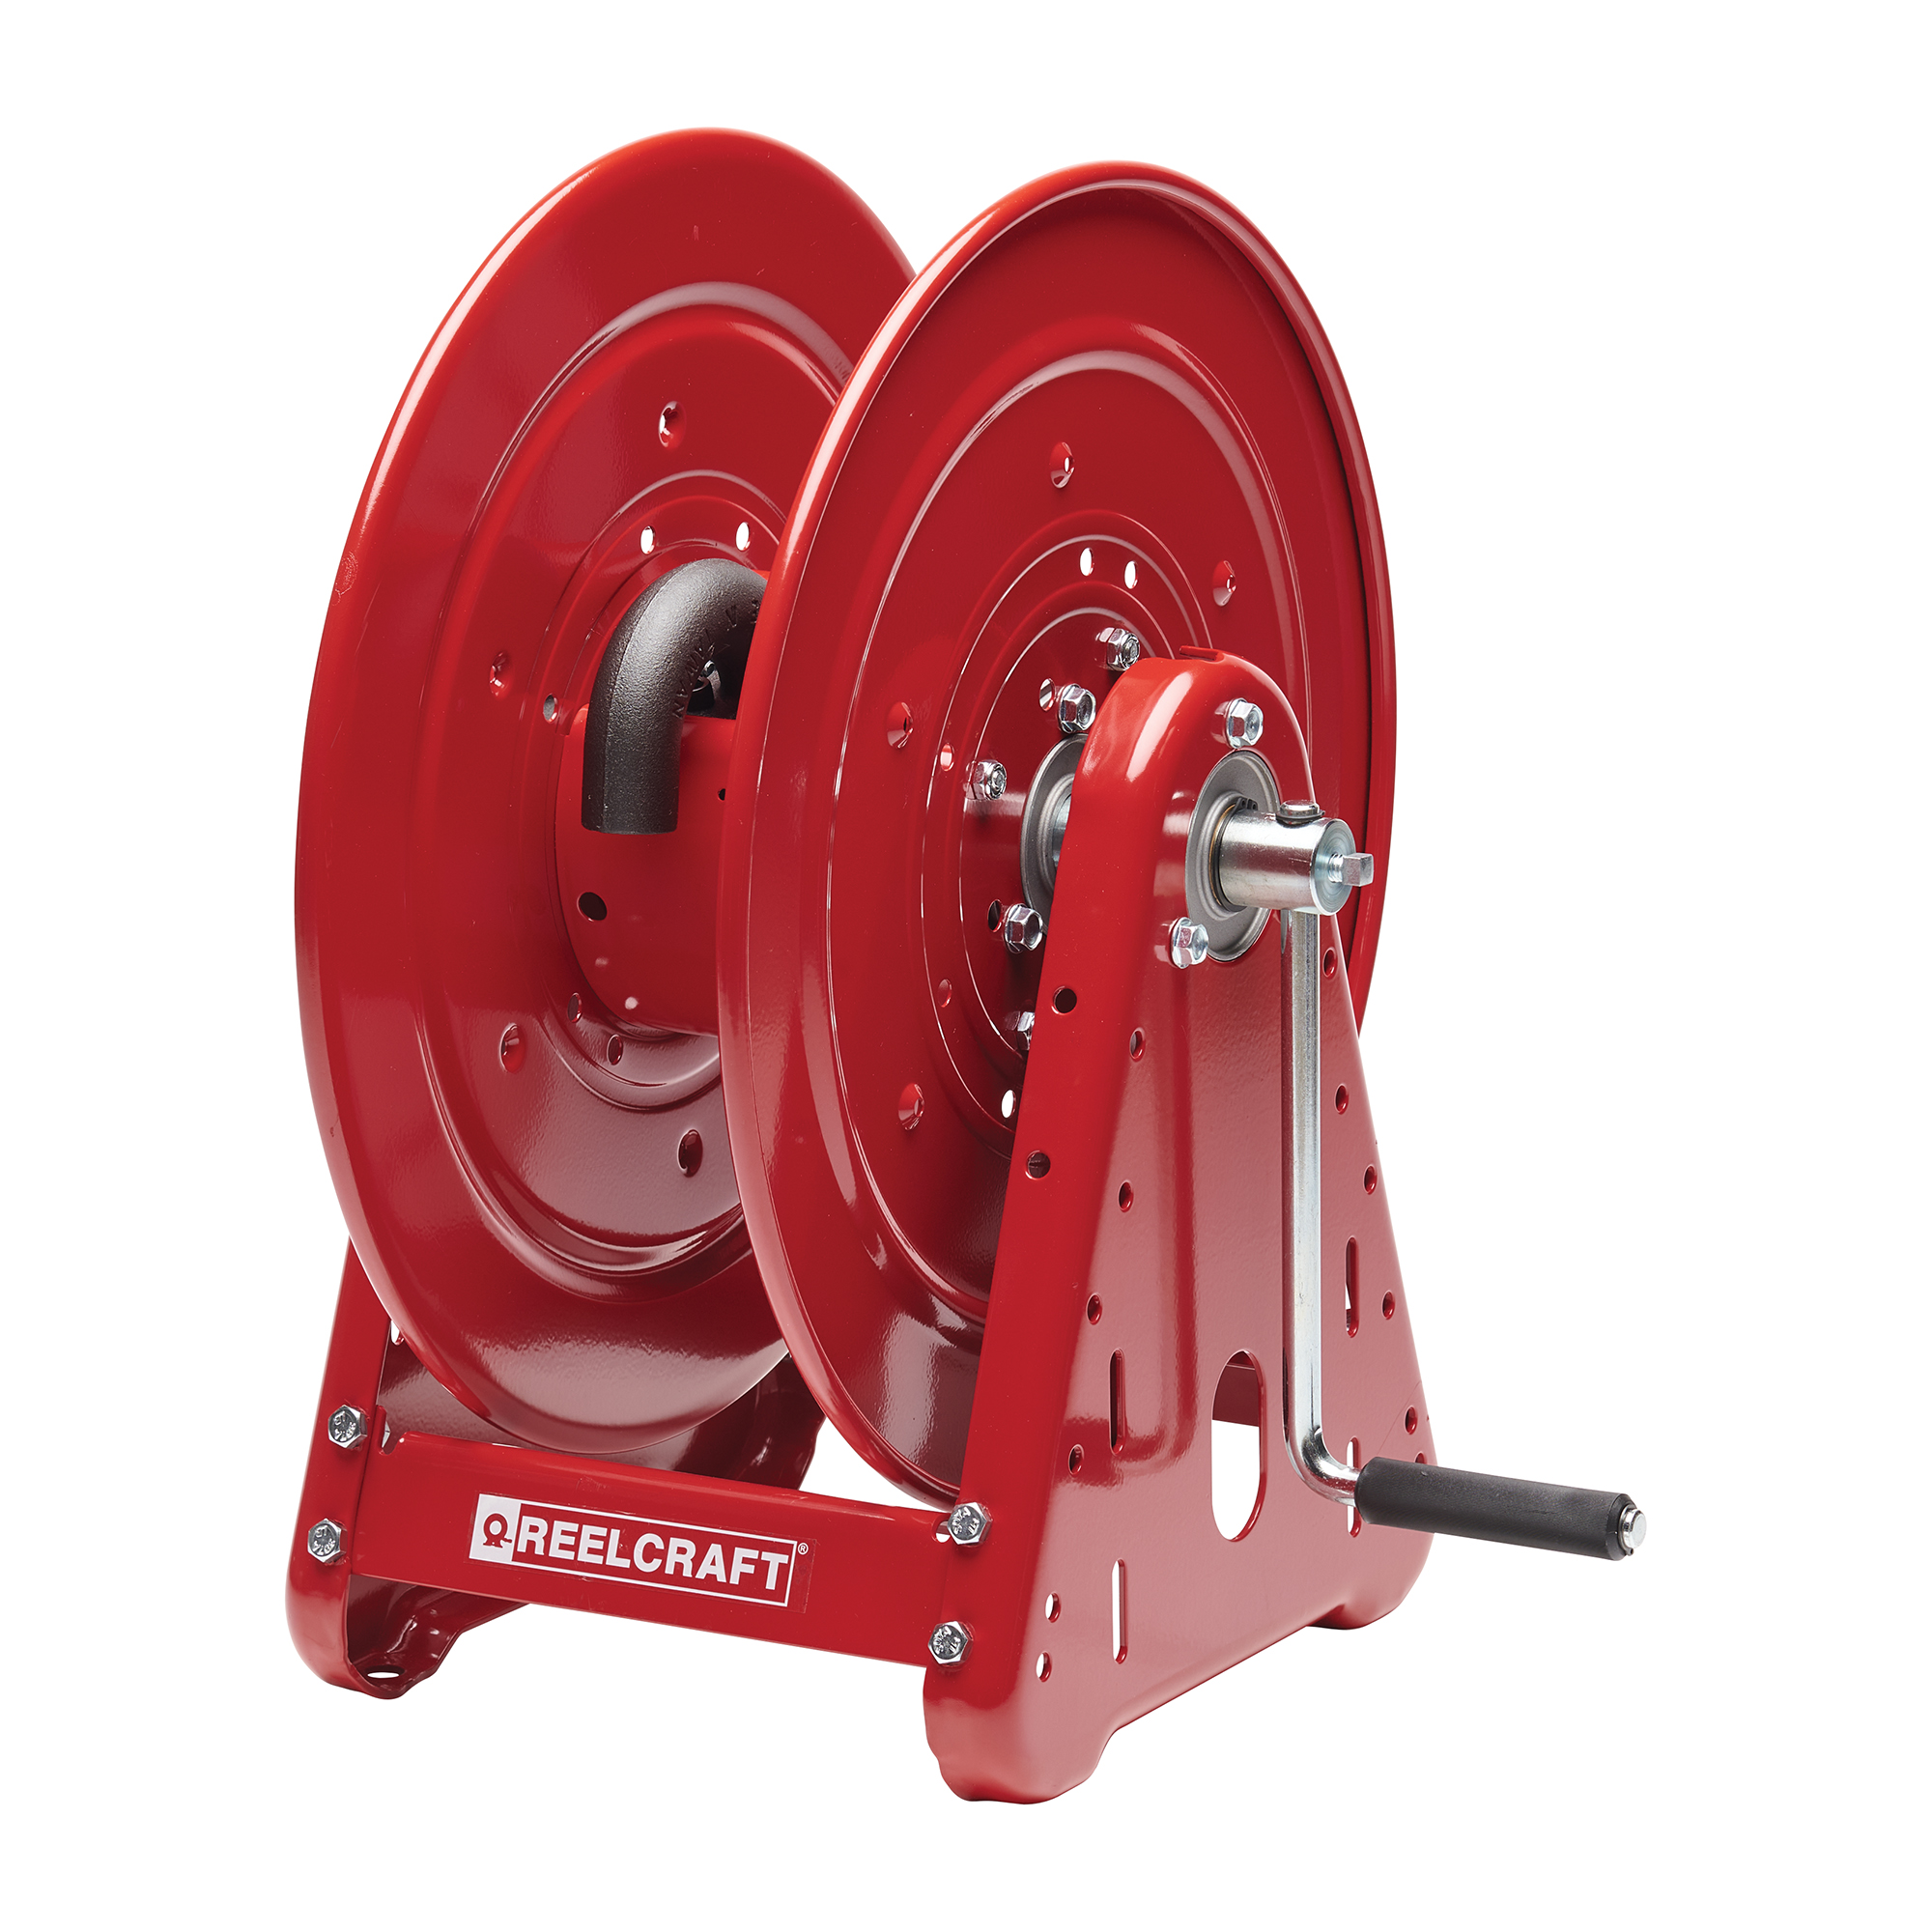 What should you consider when selecting a hydraulic hose reel